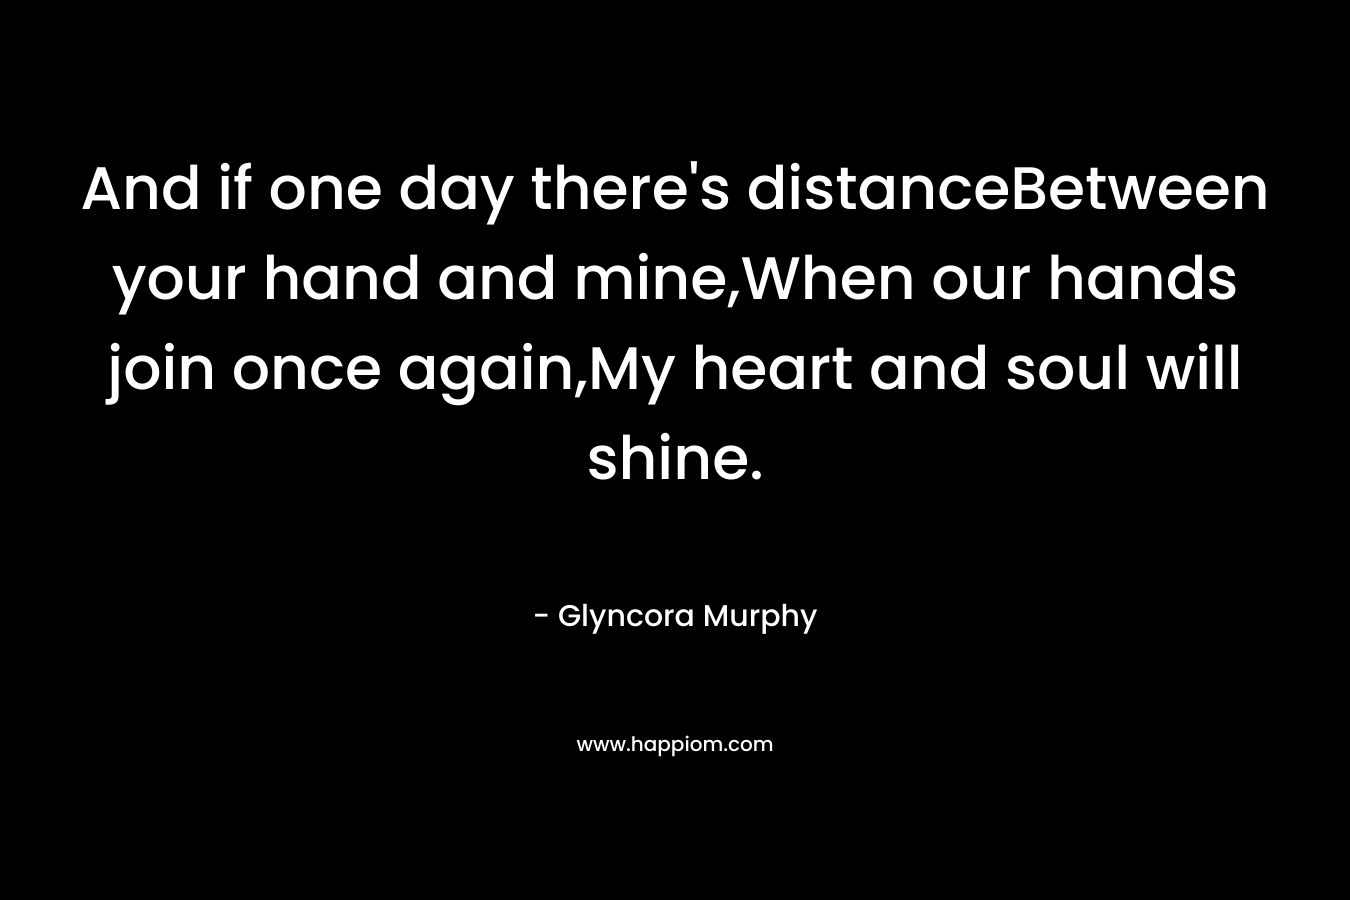 And if one day there's distanceBetween your hand and mine,When our hands join once again,My heart and soul will shine.